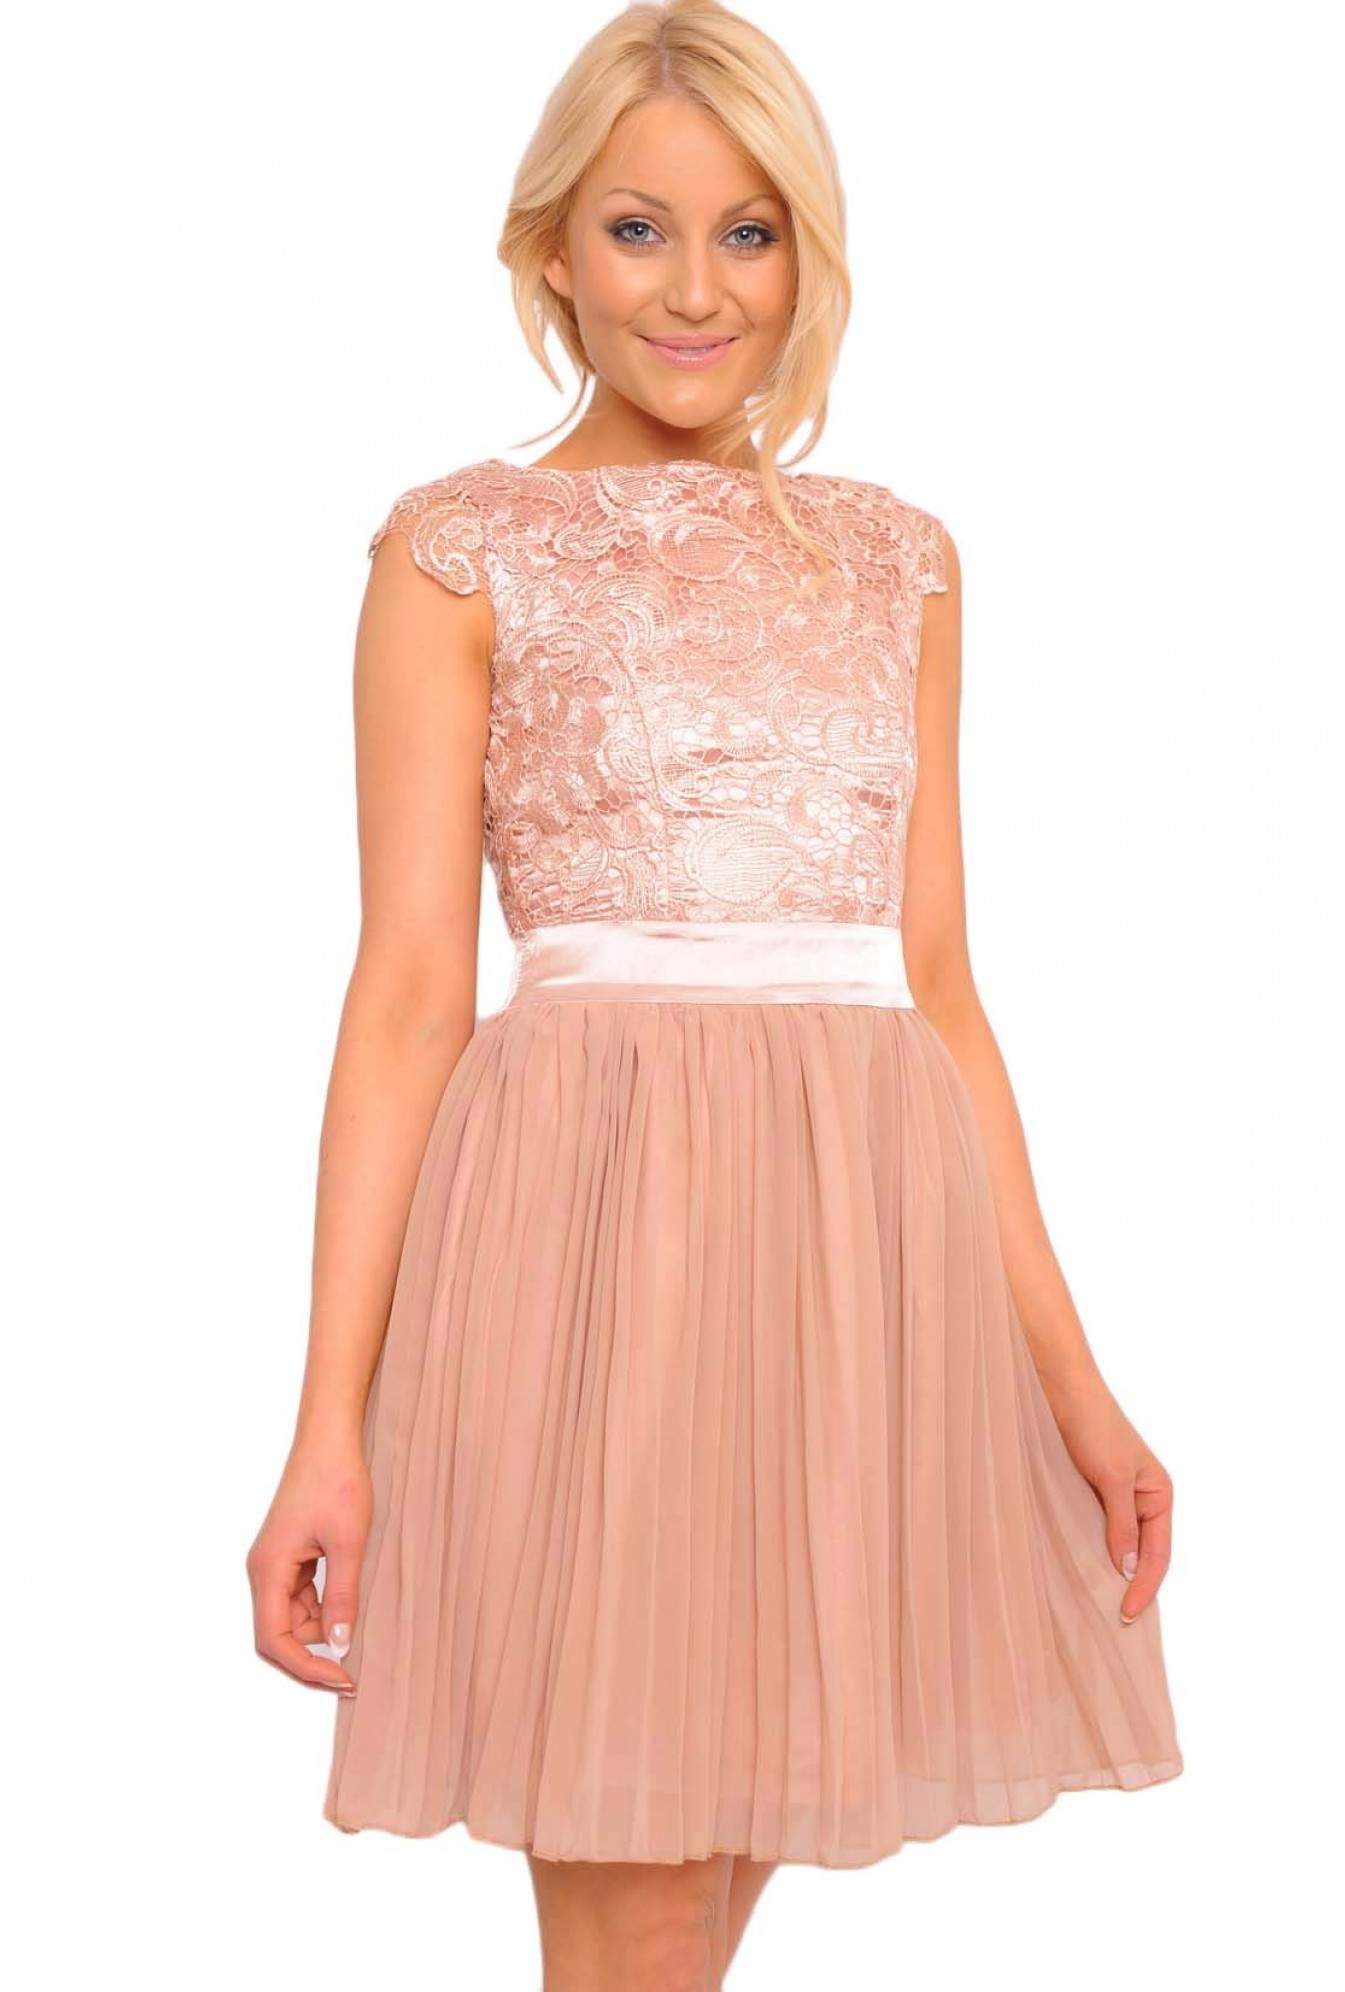 Diva Lace Top Dress in Nude | iCLOTHING